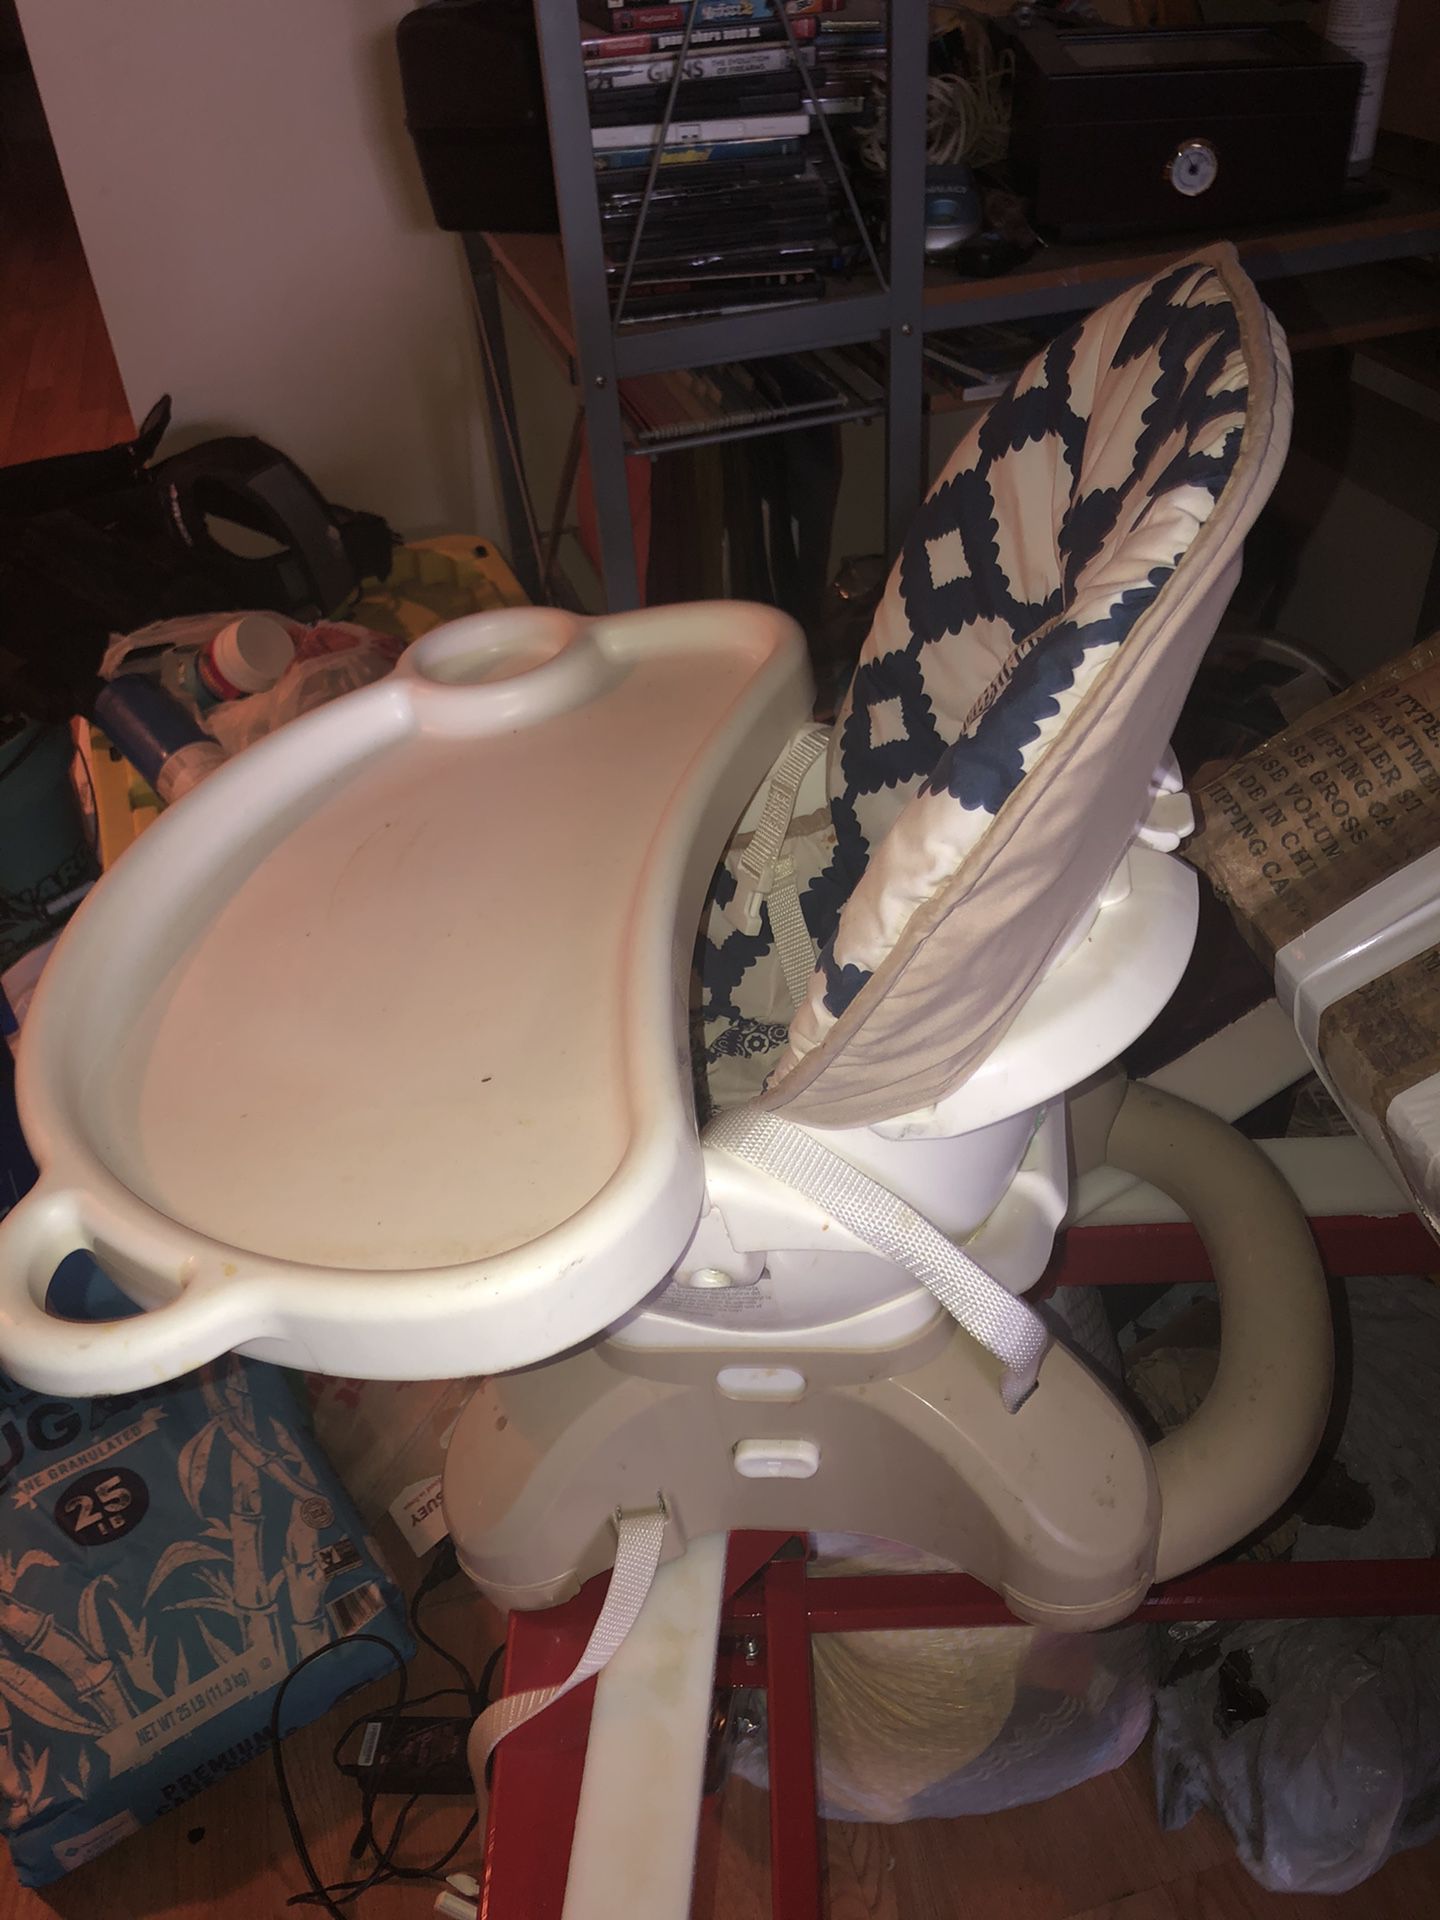 Baby items: Space Saver High Chair, Changing Table, Crib/Toddler bed